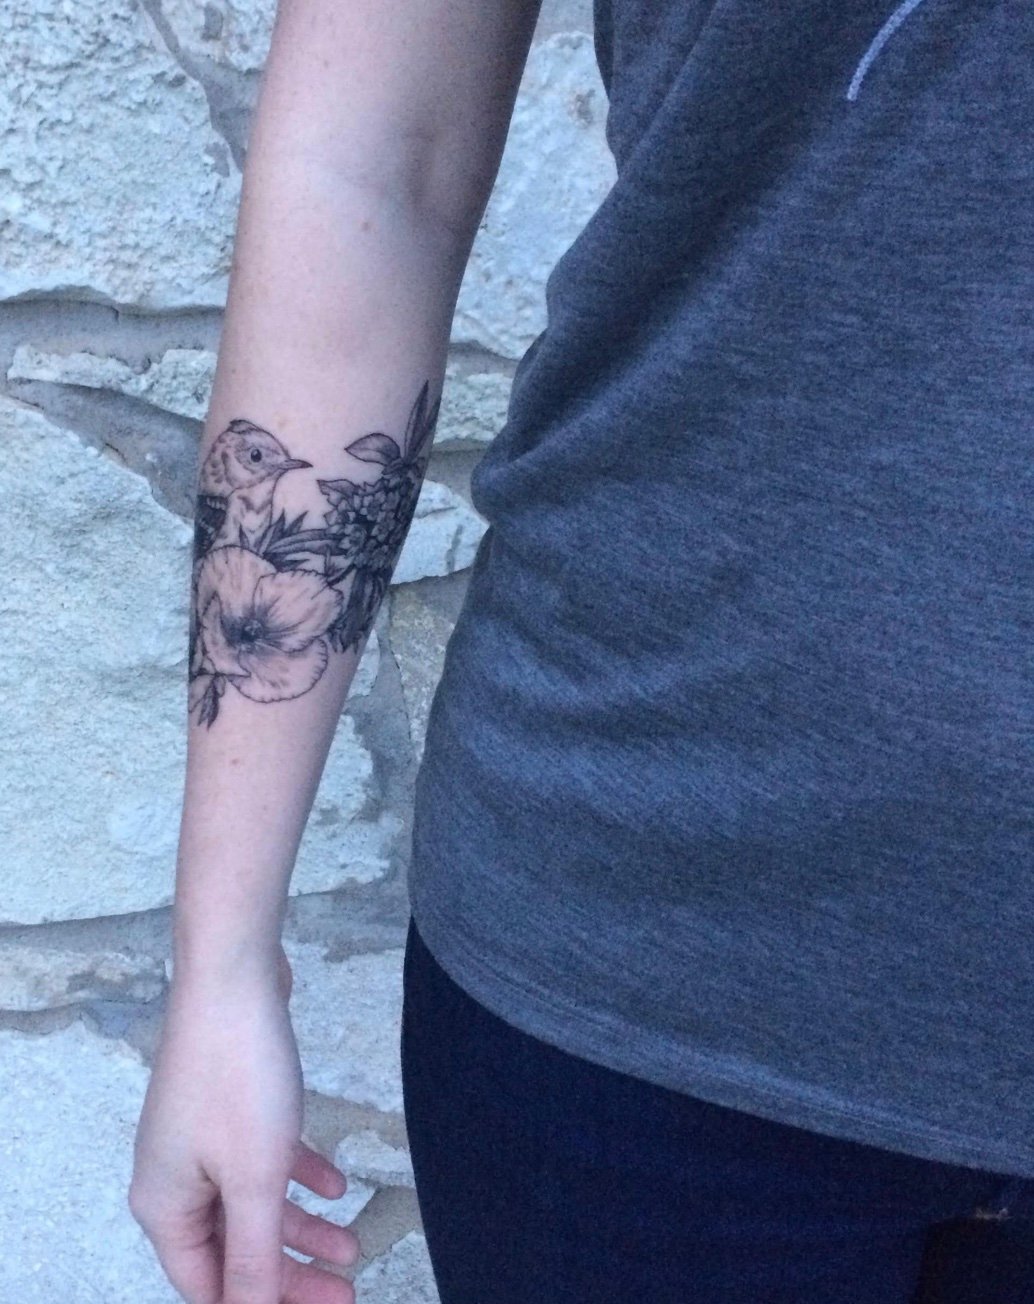 12 Readers Share Their Meaningful Tattoos